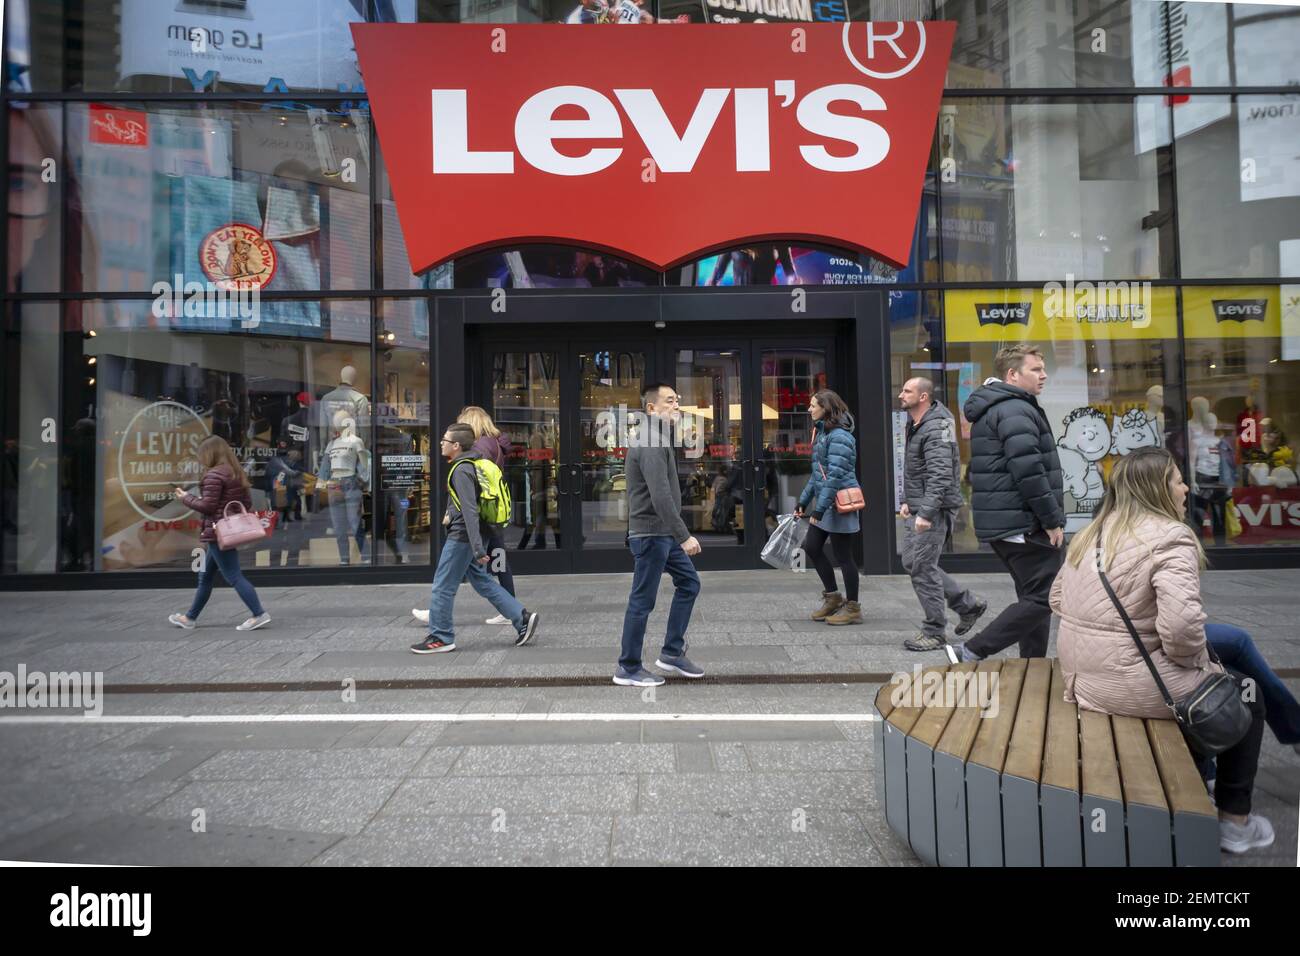 suffix ortodoks Jeg spiser morgenmad The Levi Strauss and Co. flagship store in Times Square in New York on  Tuesday, March 19, 2019. Levi Strauss & Co. announced that they will open  100 new stores over the